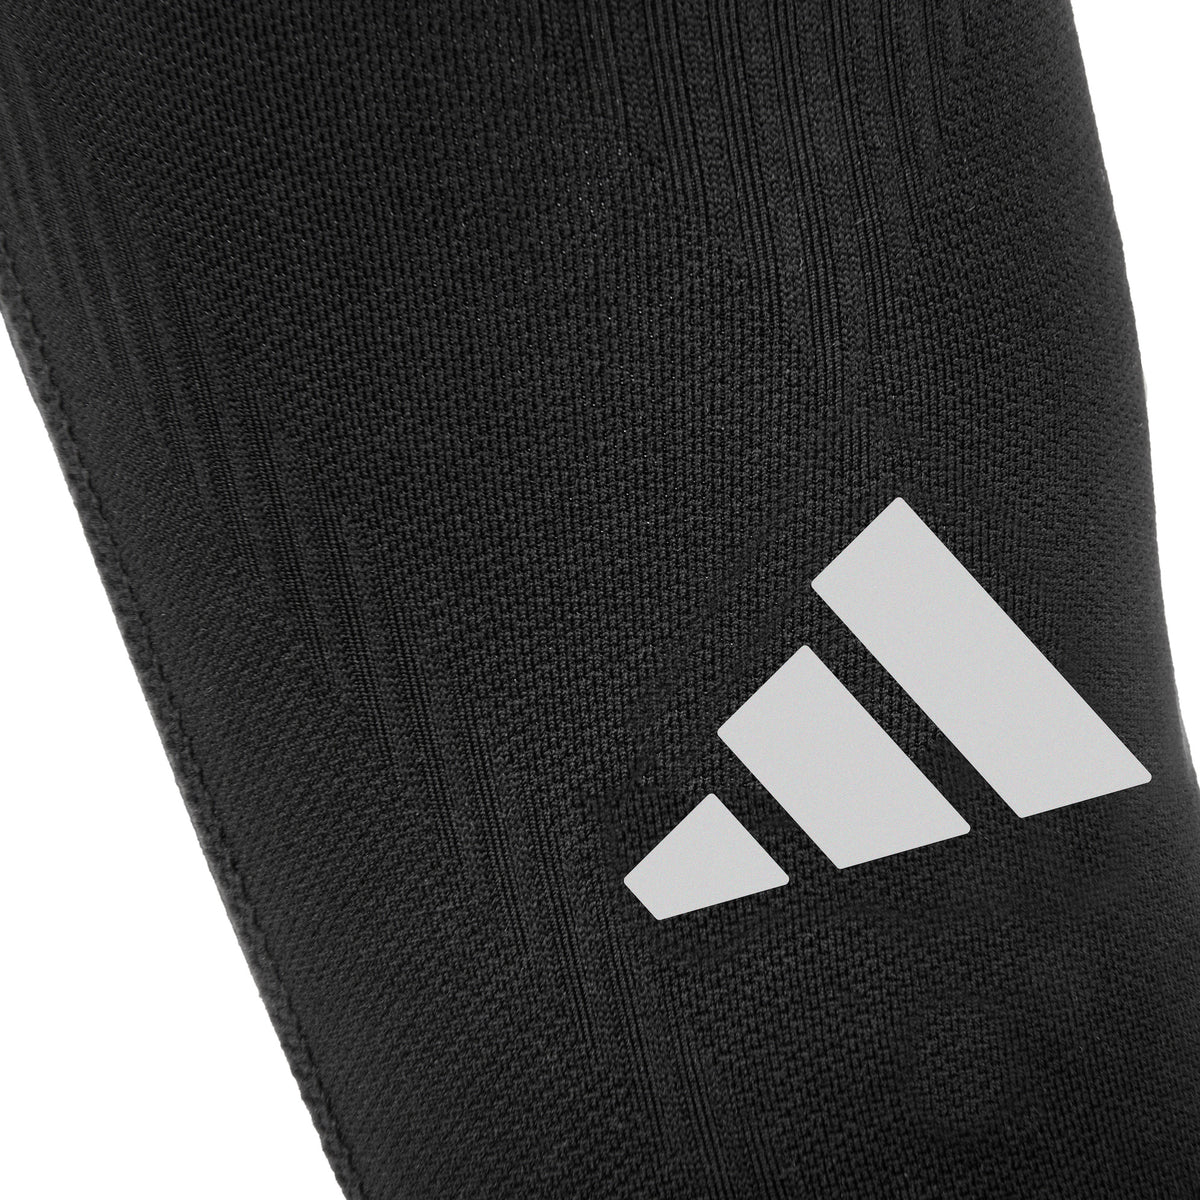 Buy Adidas Compression Calf Sleeves - Black - L/XL Online at Best